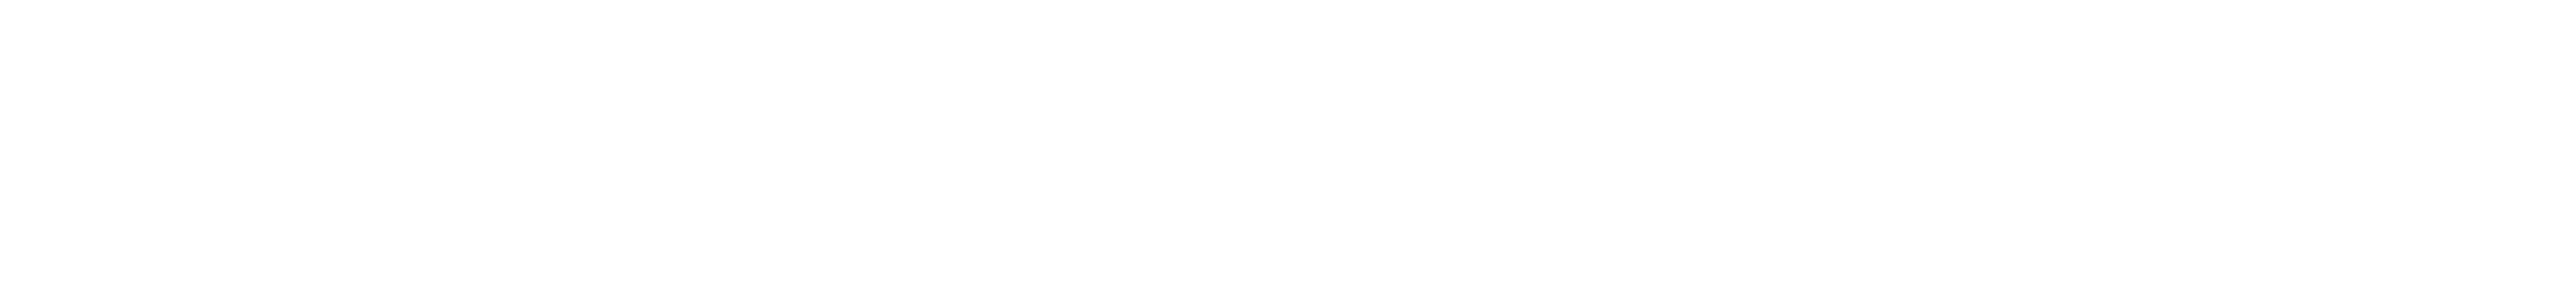 Transparent Lace PNG Clip Art Image | Gallery Yopriceville - High